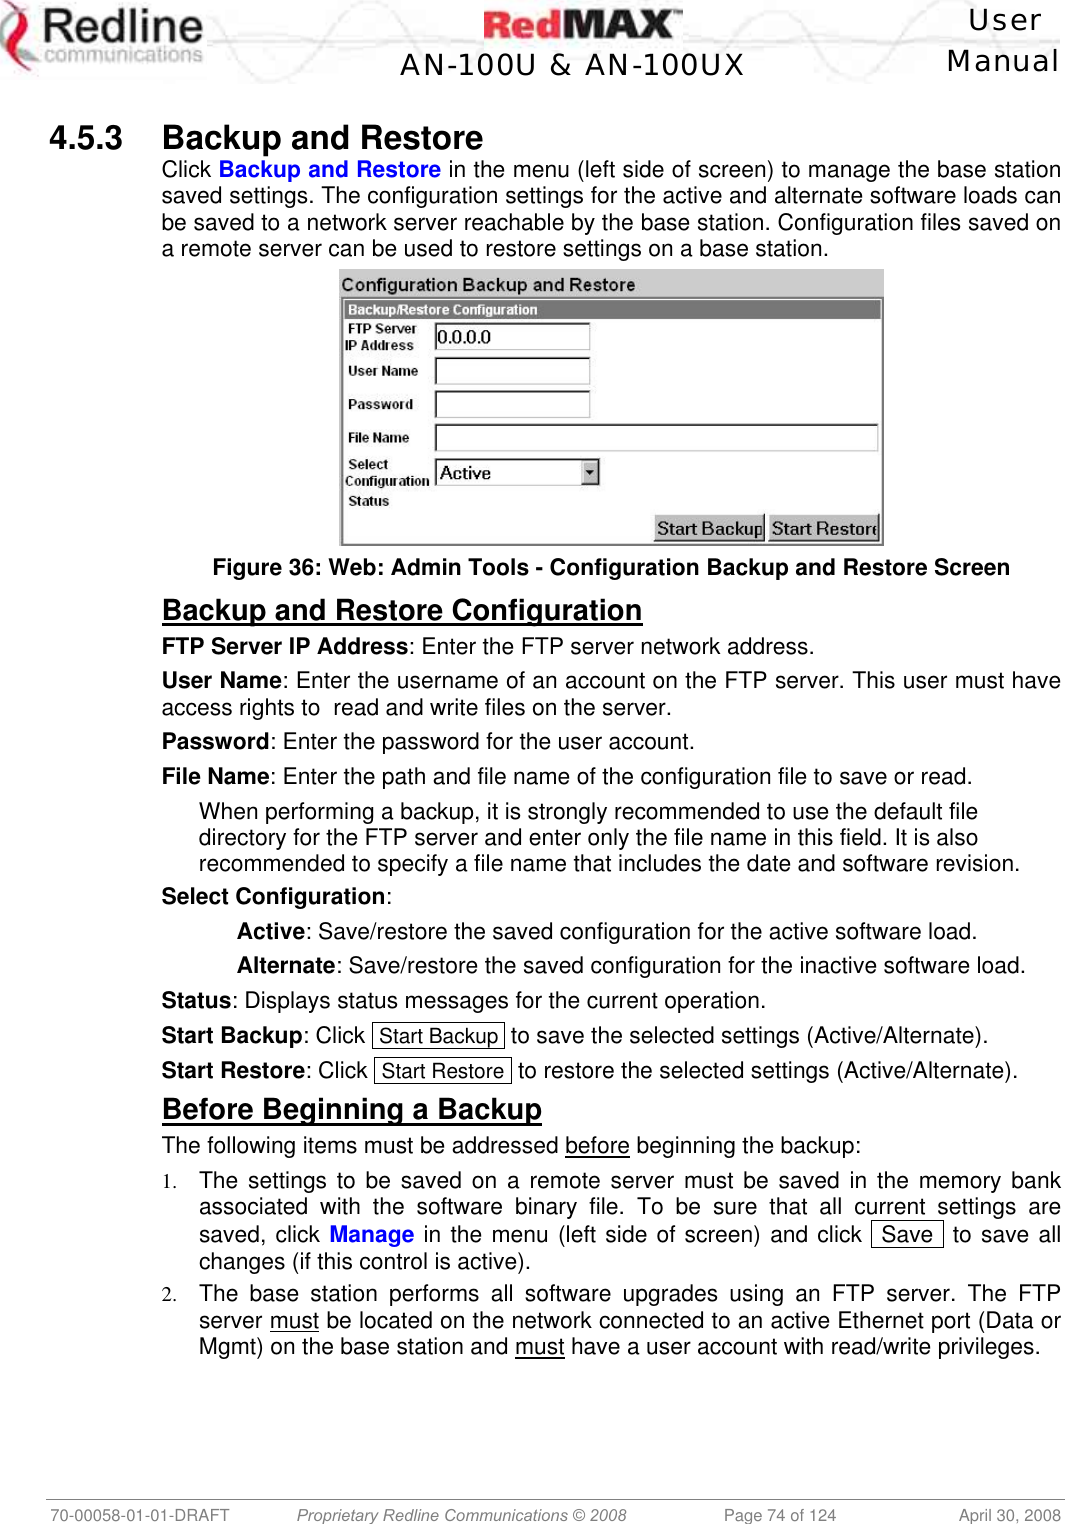    User  AN-100U &amp; AN-100UX Manual   70-00058-01-01-DRAFT  Proprietary Redline Communications © 2008   Page 74 of 124  April 30, 2008  4.5.3  Backup and Restore Click Backup and Restore in the menu (left side of screen) to manage the base station saved settings. The configuration settings for the active and alternate software loads can be saved to a network server reachable by the base station. Configuration files saved on a remote server can be used to restore settings on a base station.   Figure 36: Web: Admin Tools - Configuration Backup and Restore Screen Backup and Restore Configuration FTP Server IP Address: Enter the FTP server network address. User Name: Enter the username of an account on the FTP server. This user must have access rights to  read and write files on the server. Password: Enter the password for the user account. File Name: Enter the path and file name of the configuration file to save or read. When performing a backup, it is strongly recommended to use the default file directory for the FTP server and enter only the file name in this field. It is also recommended to specify a file name that includes the date and software revision. Select Configuration:   Active: Save/restore the saved configuration for the active software load.  Alternate: Save/restore the saved configuration for the inactive software load. Status: Displays status messages for the current operation. Start Backup: Click  Start Backup  to save the selected settings (Active/Alternate). Start Restore: Click  Start Restore  to restore the selected settings (Active/Alternate). Before Beginning a Backup The following items must be addressed before beginning the backup: 1.  The settings to be saved on a remote server must be saved in the memory bank associated with the software binary file. To be sure that all current settings are saved, click Manage in the menu (left side of screen) and click  Save  to save all changes (if this control is active). 2.  The base station performs all software upgrades using an FTP server. The FTP server must be located on the network connected to an active Ethernet port (Data or Mgmt) on the base station and must have a user account with read/write privileges. 